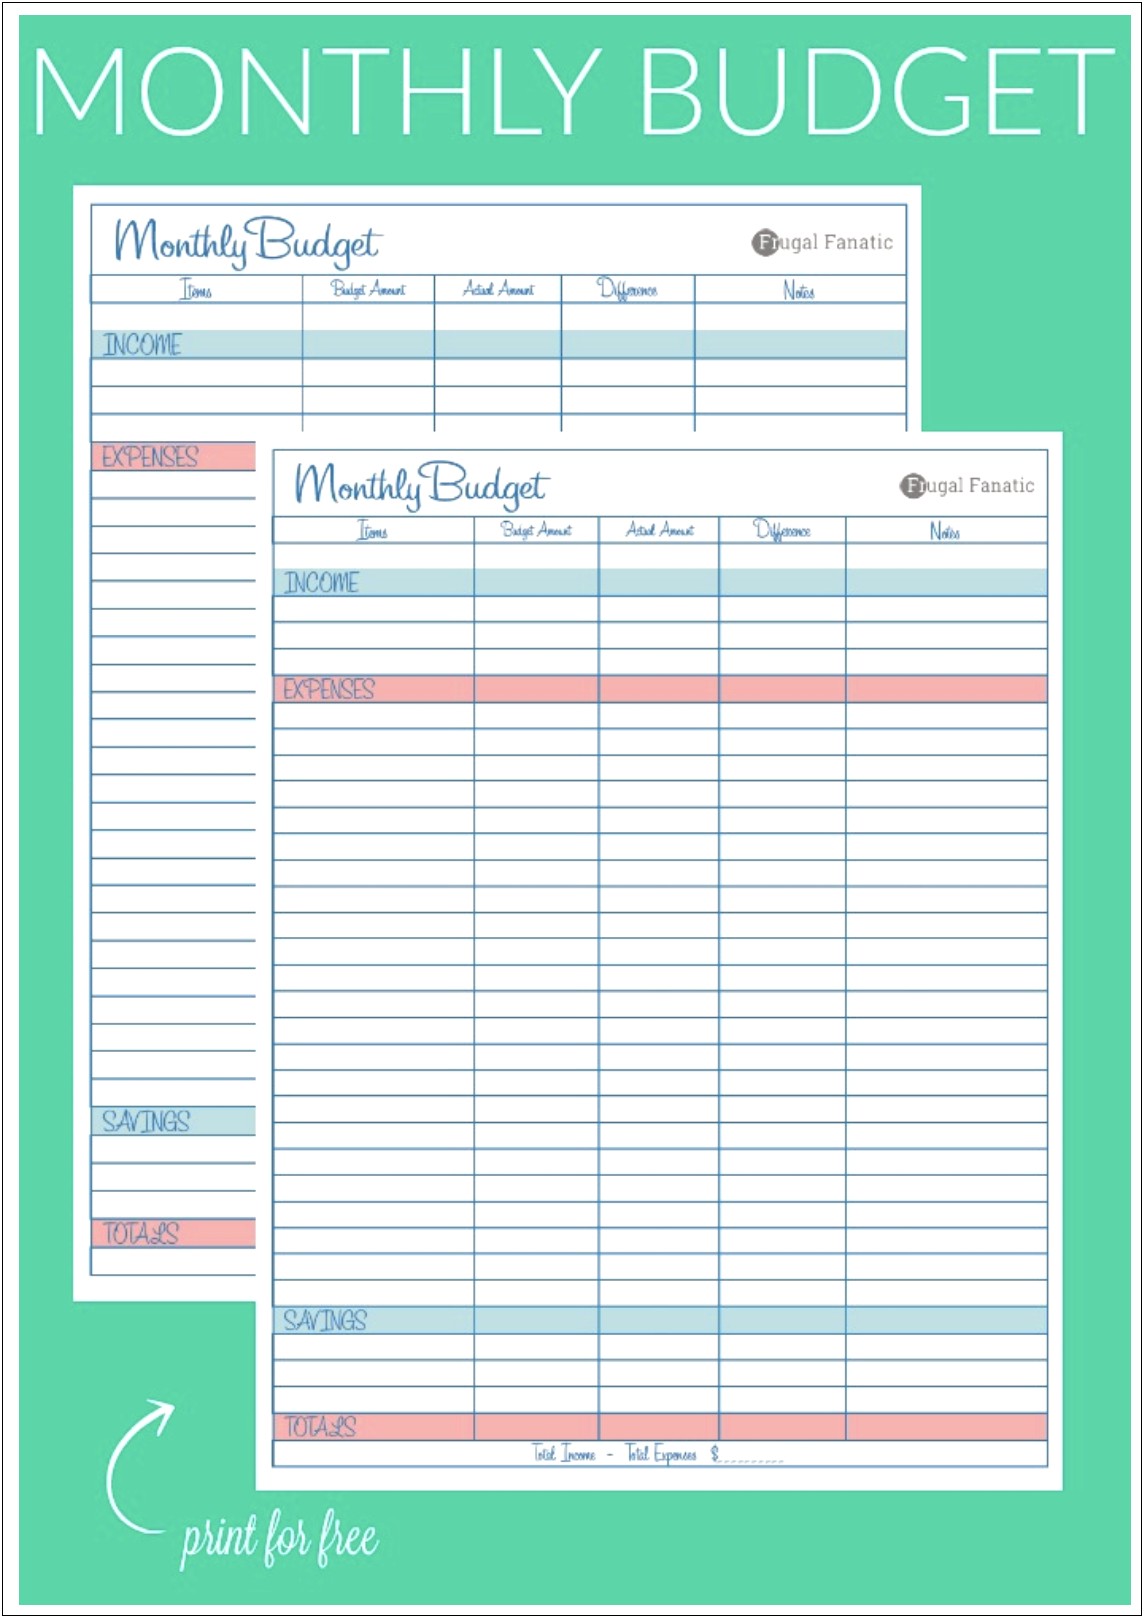 free-printable-monthly-budget-planner-template-resume-example-gallery